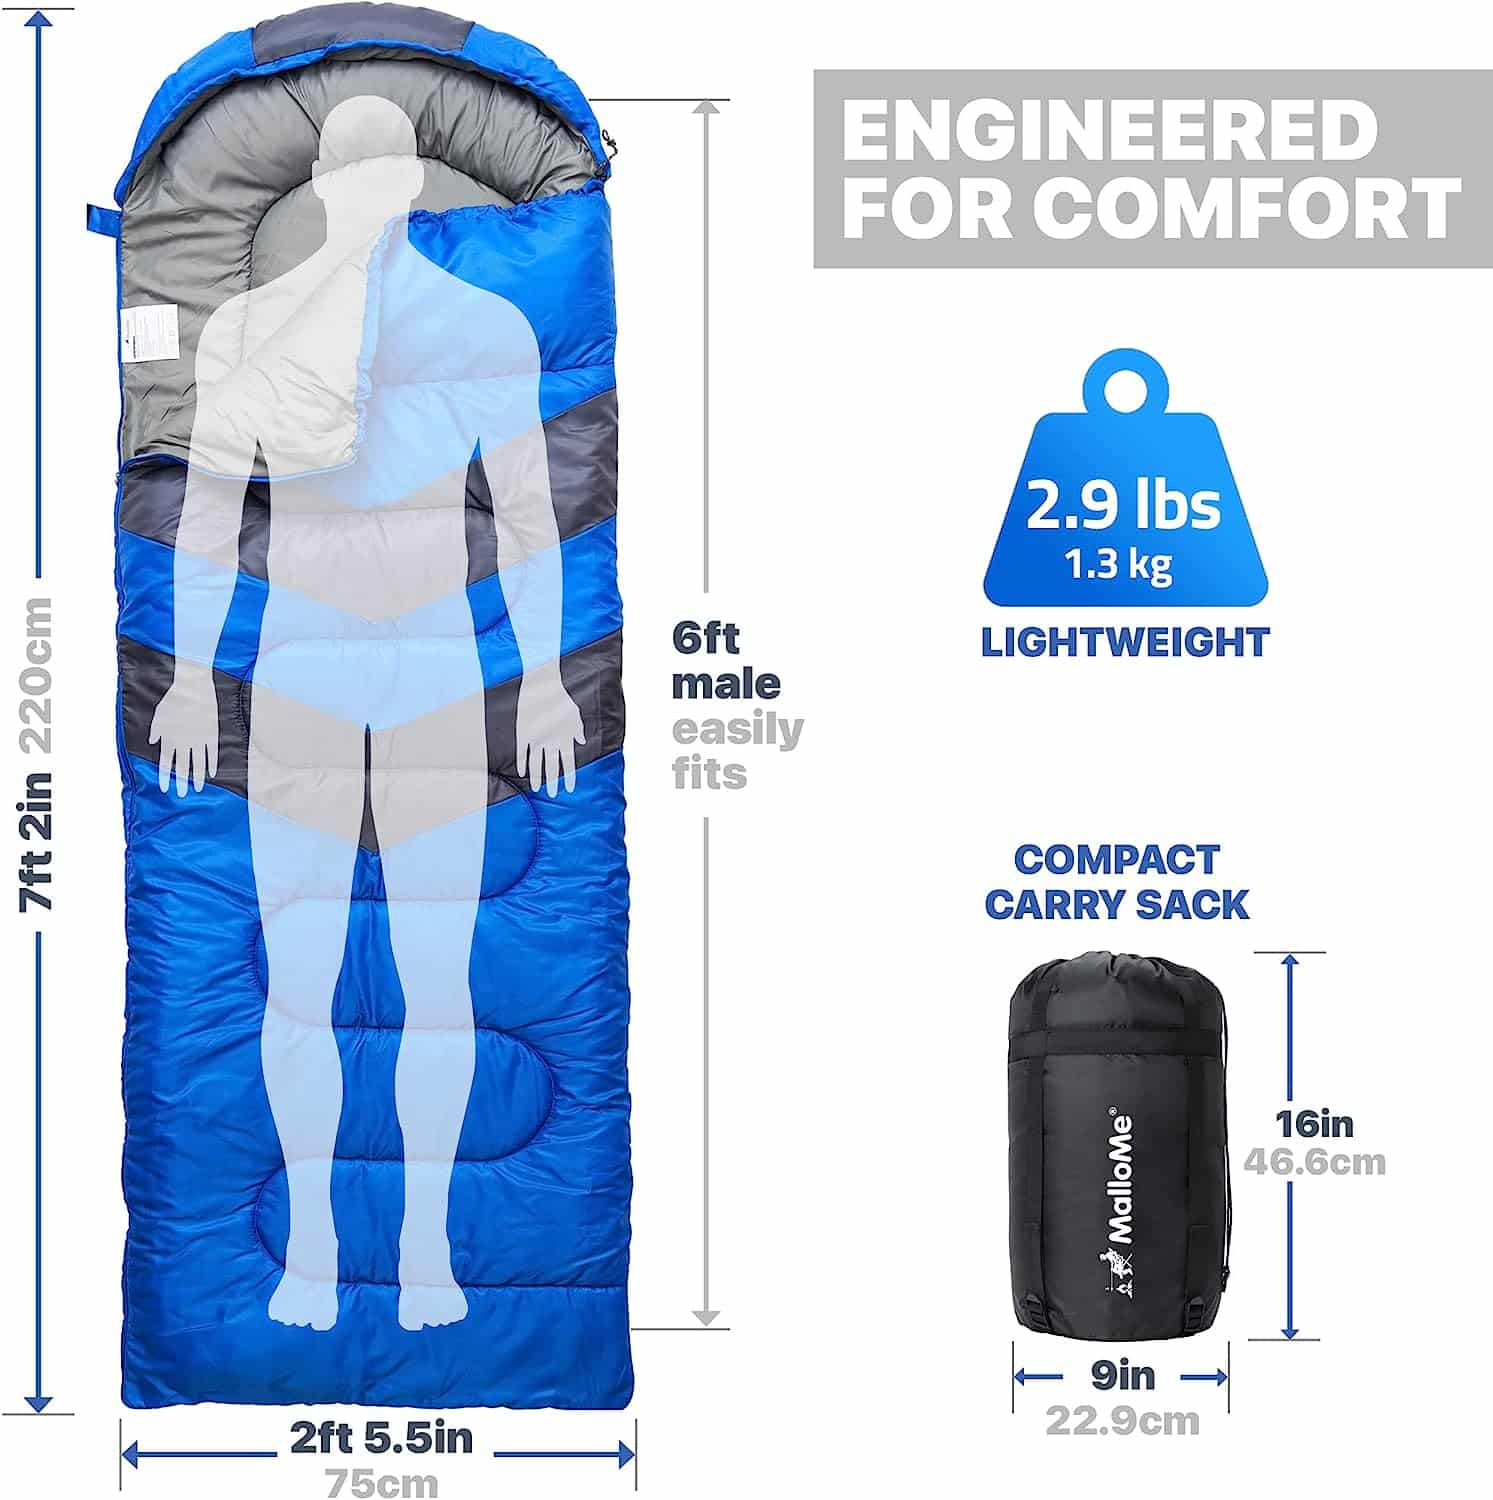 Experience Comfort and Warmth with MalloMe Sleeping Bags